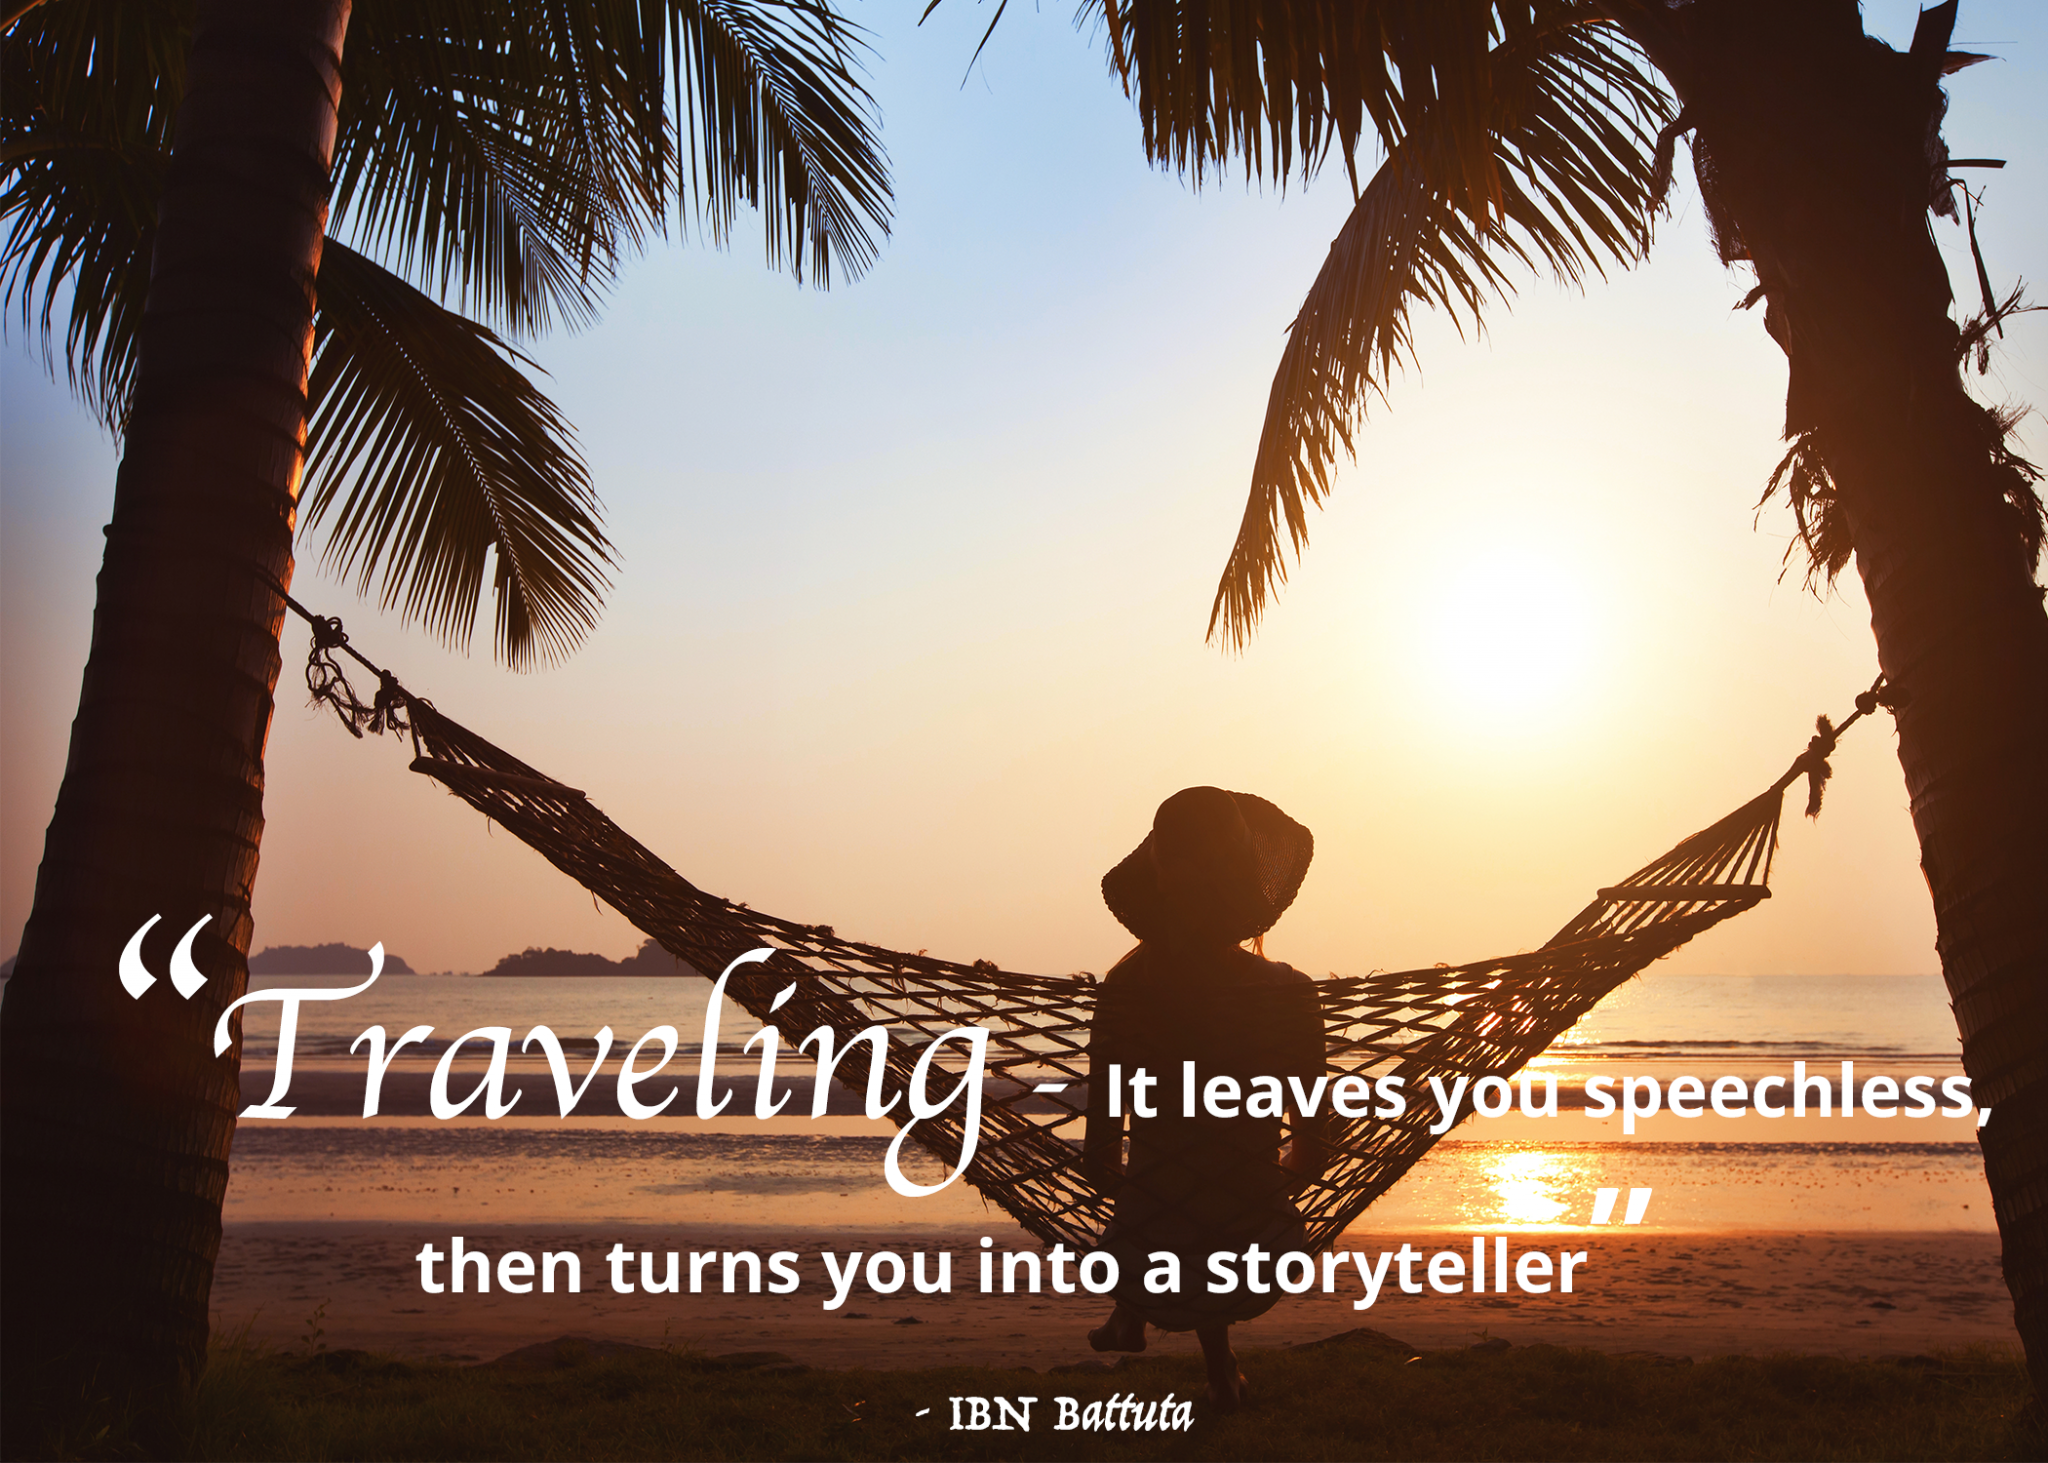 The 20 Best Travel Quotes To Spark The Explorer Inside You | Magellan